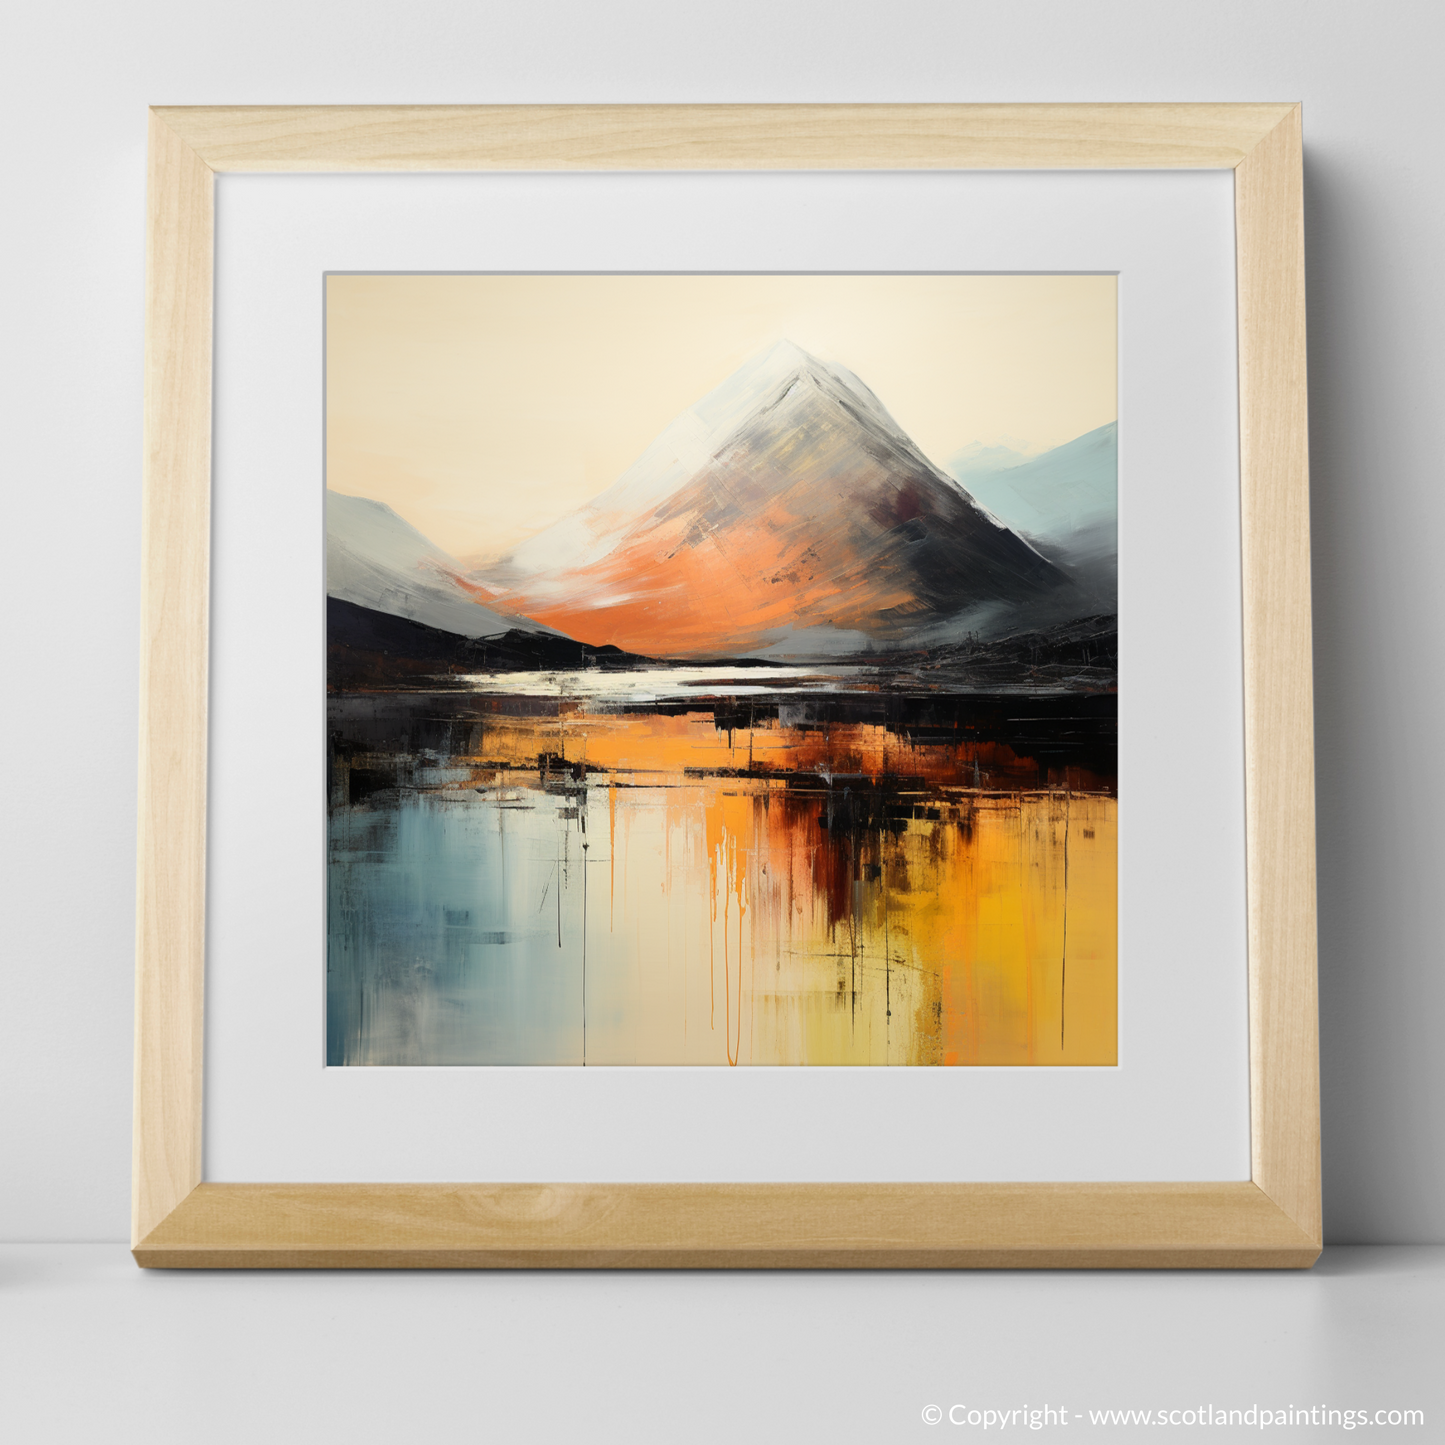 Highland Mirage: An Abstract Reflection of Buachaille Etive Mòr